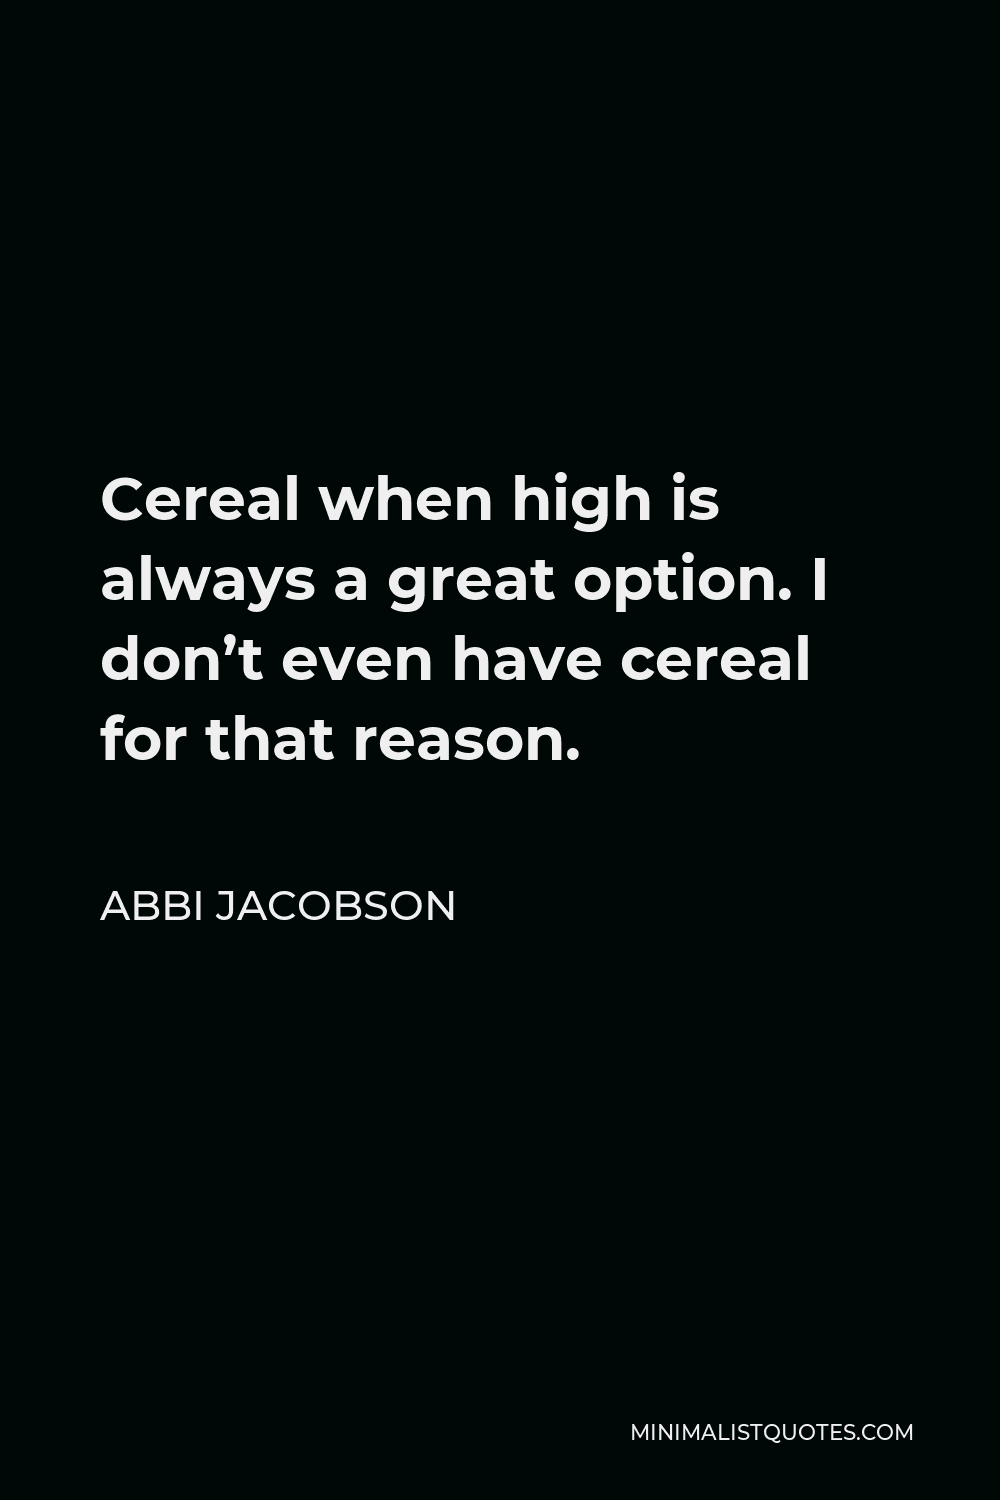 Abbi Jacobson Quote - Cereal when high is always a great option. I don’t even have cereal for that reason.